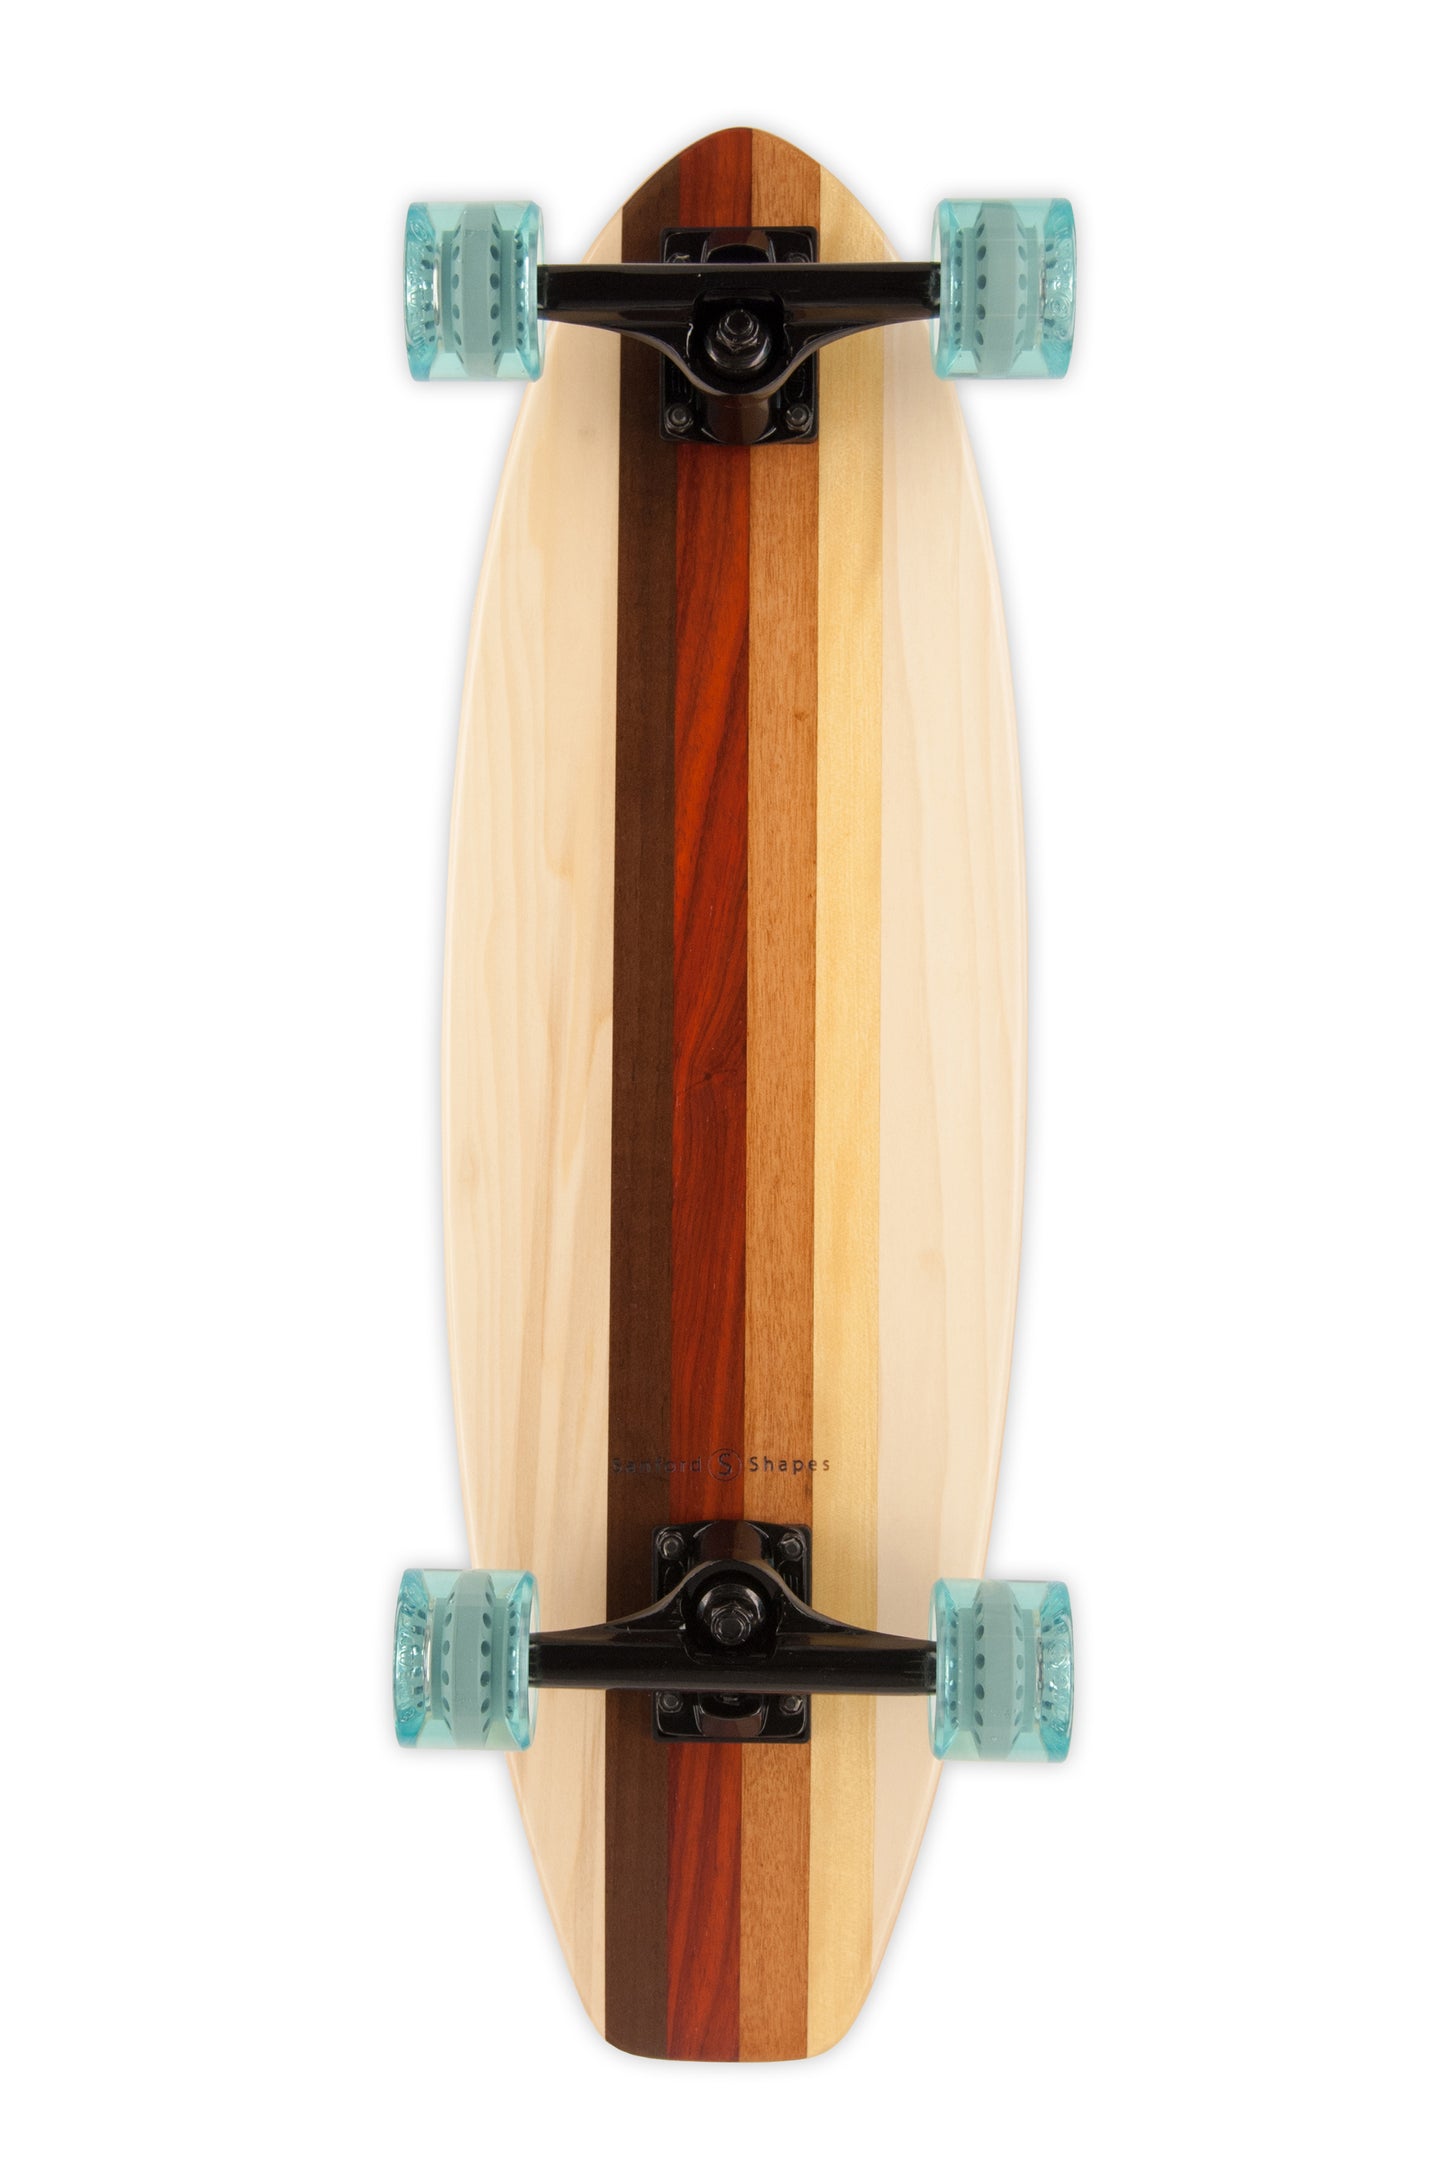 LINEUP SMALL COMPLETE SKATEBOARD 27.5"